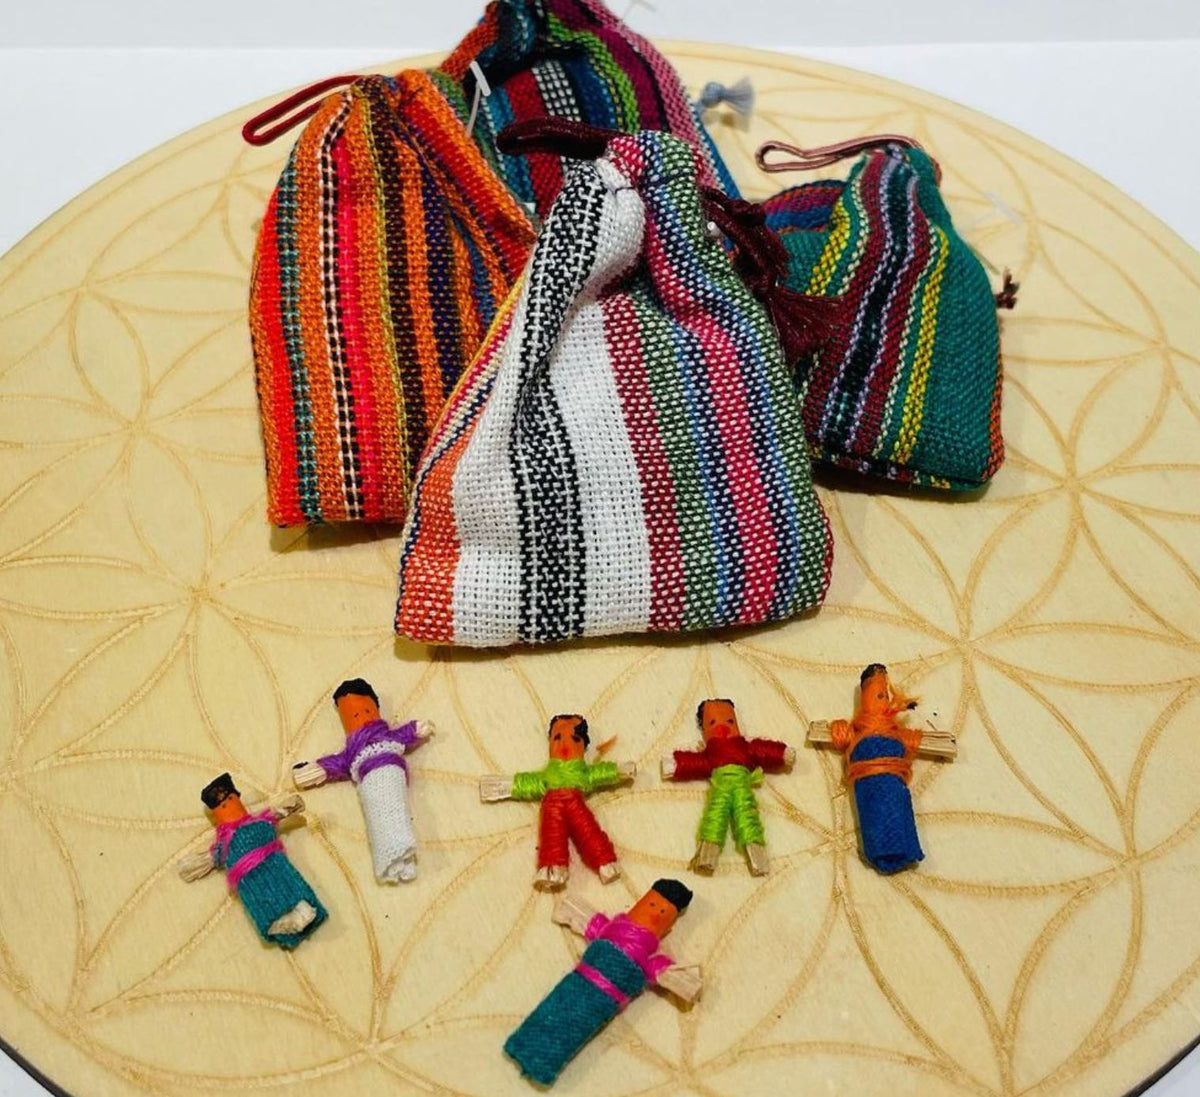 Different types of worry dolls from around the world – Worry Dolls